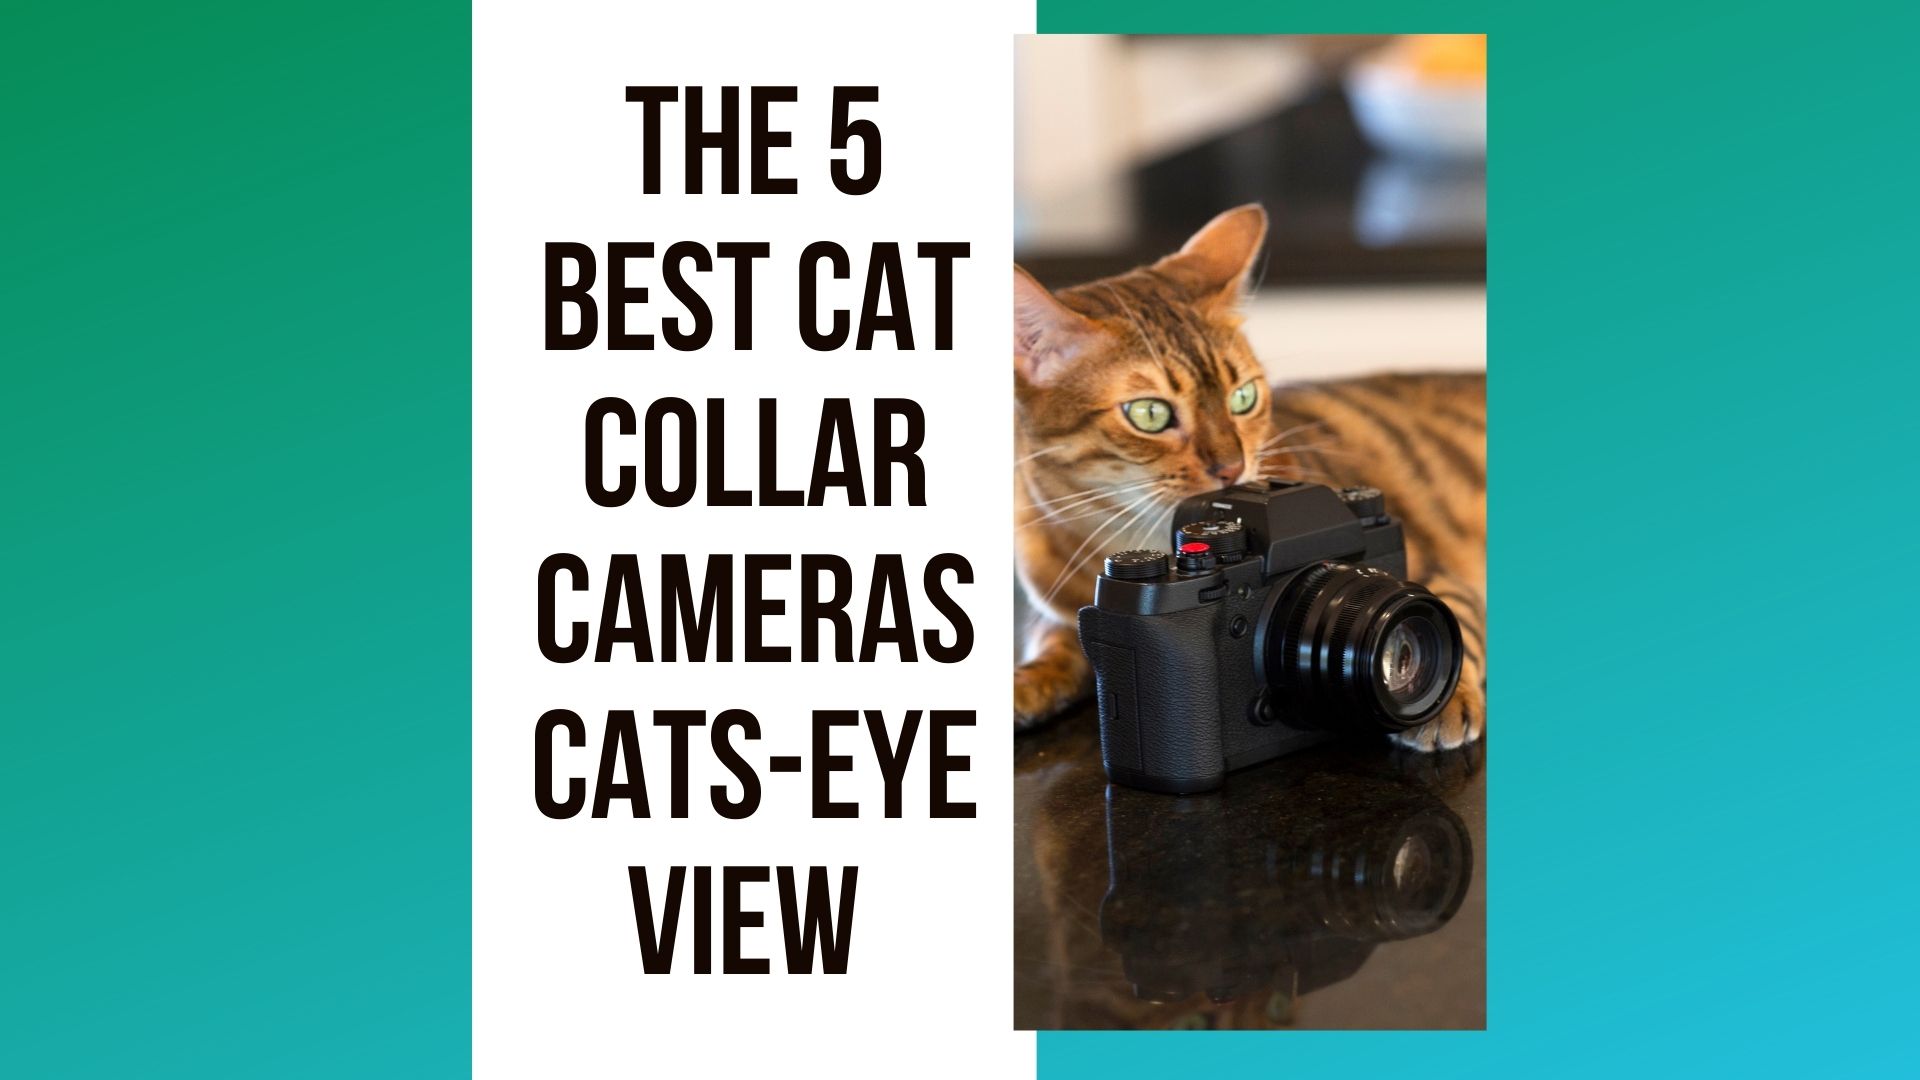 The Cats-Eye View: 3 Best Cat Collar Cameras - Traveling With Your Cat